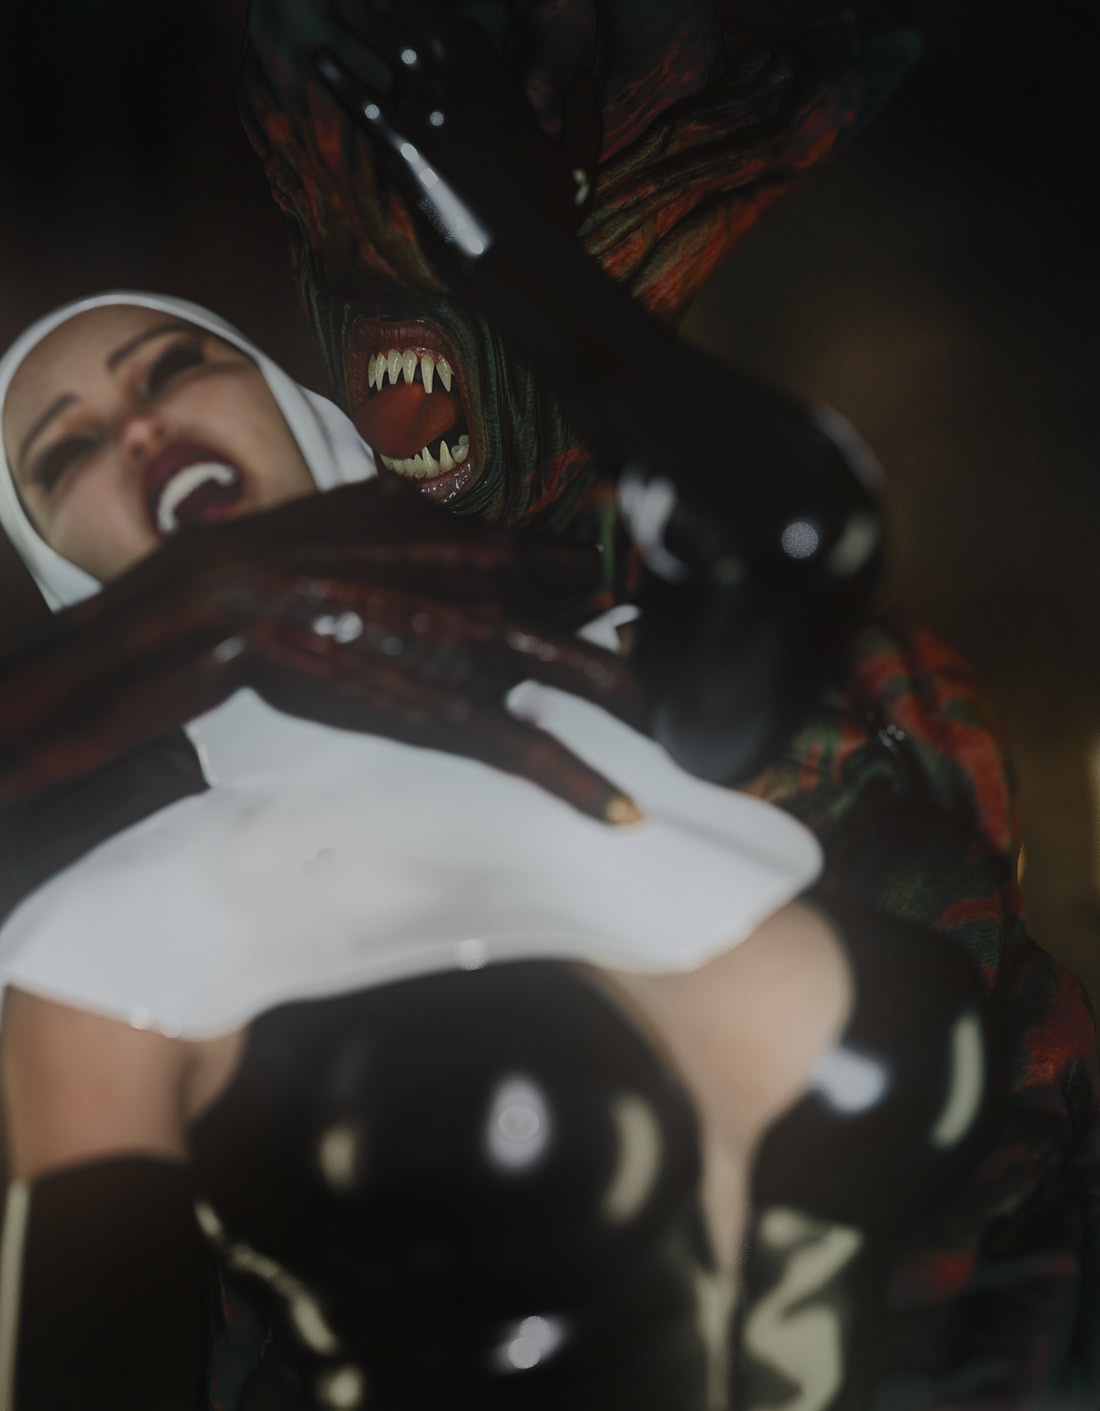 Fetish nun character and some scenes with monster - Nun demon